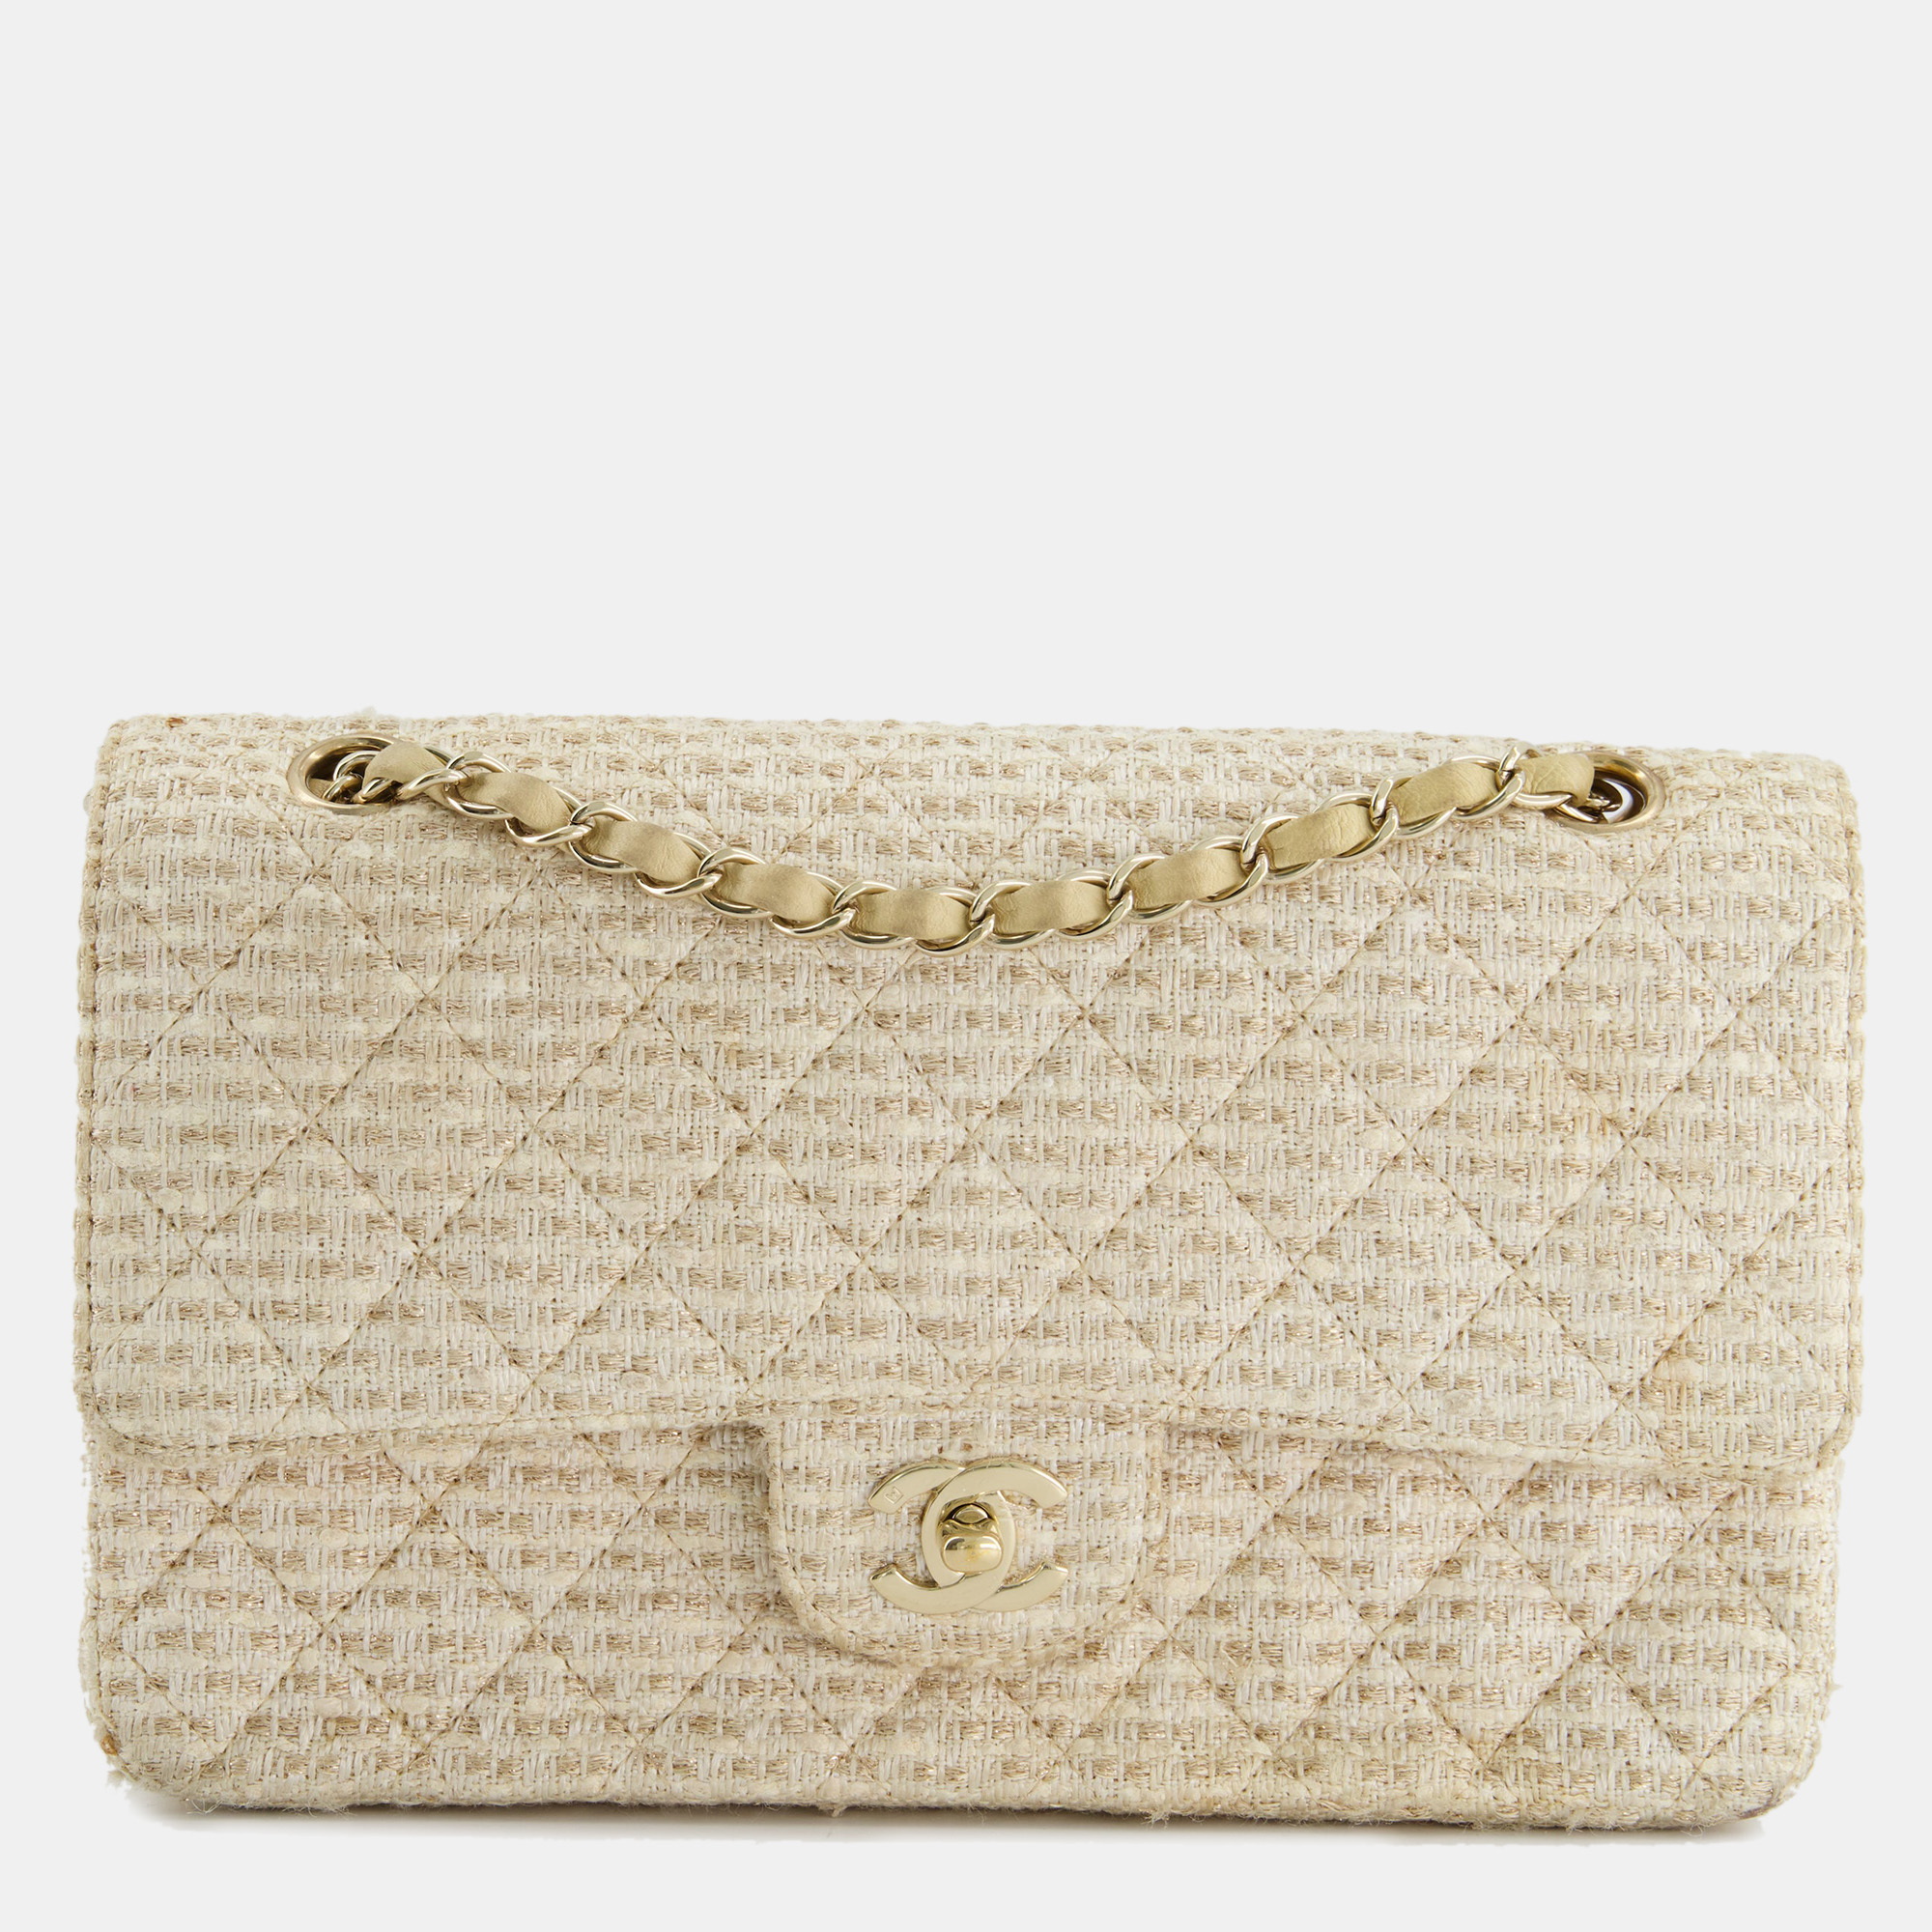 Chanel medium classic double flap bag in beige and gold tweed with champagne gold hardware